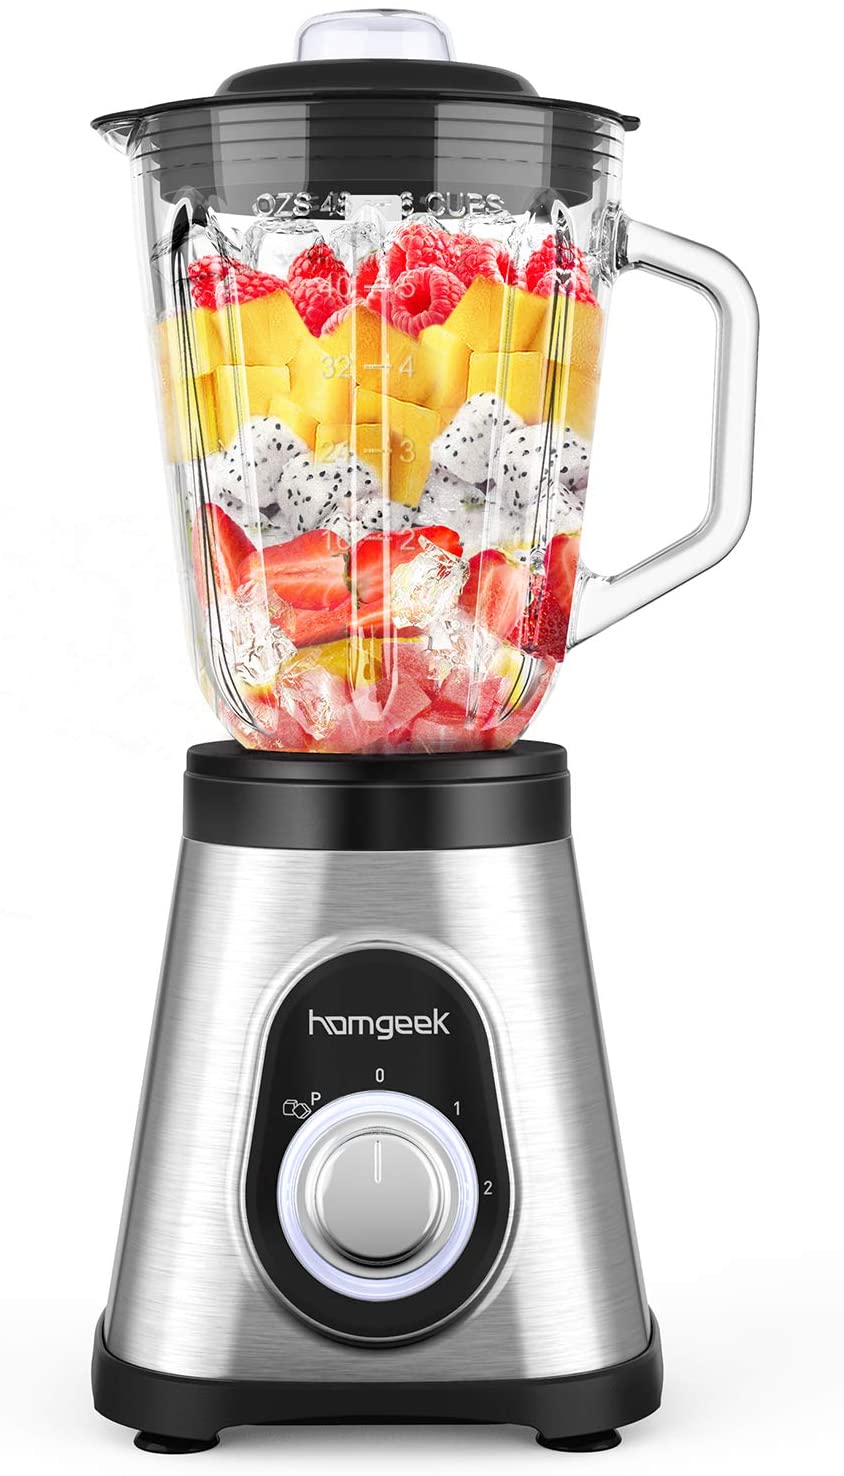 Homgeek Blender 750W, Smoothie Blender for Shakes and Smoothies, Smoothie Maker with 51 oz Glass Pitcher for Crushing Ice and Frozen Fruit - Walmart.com